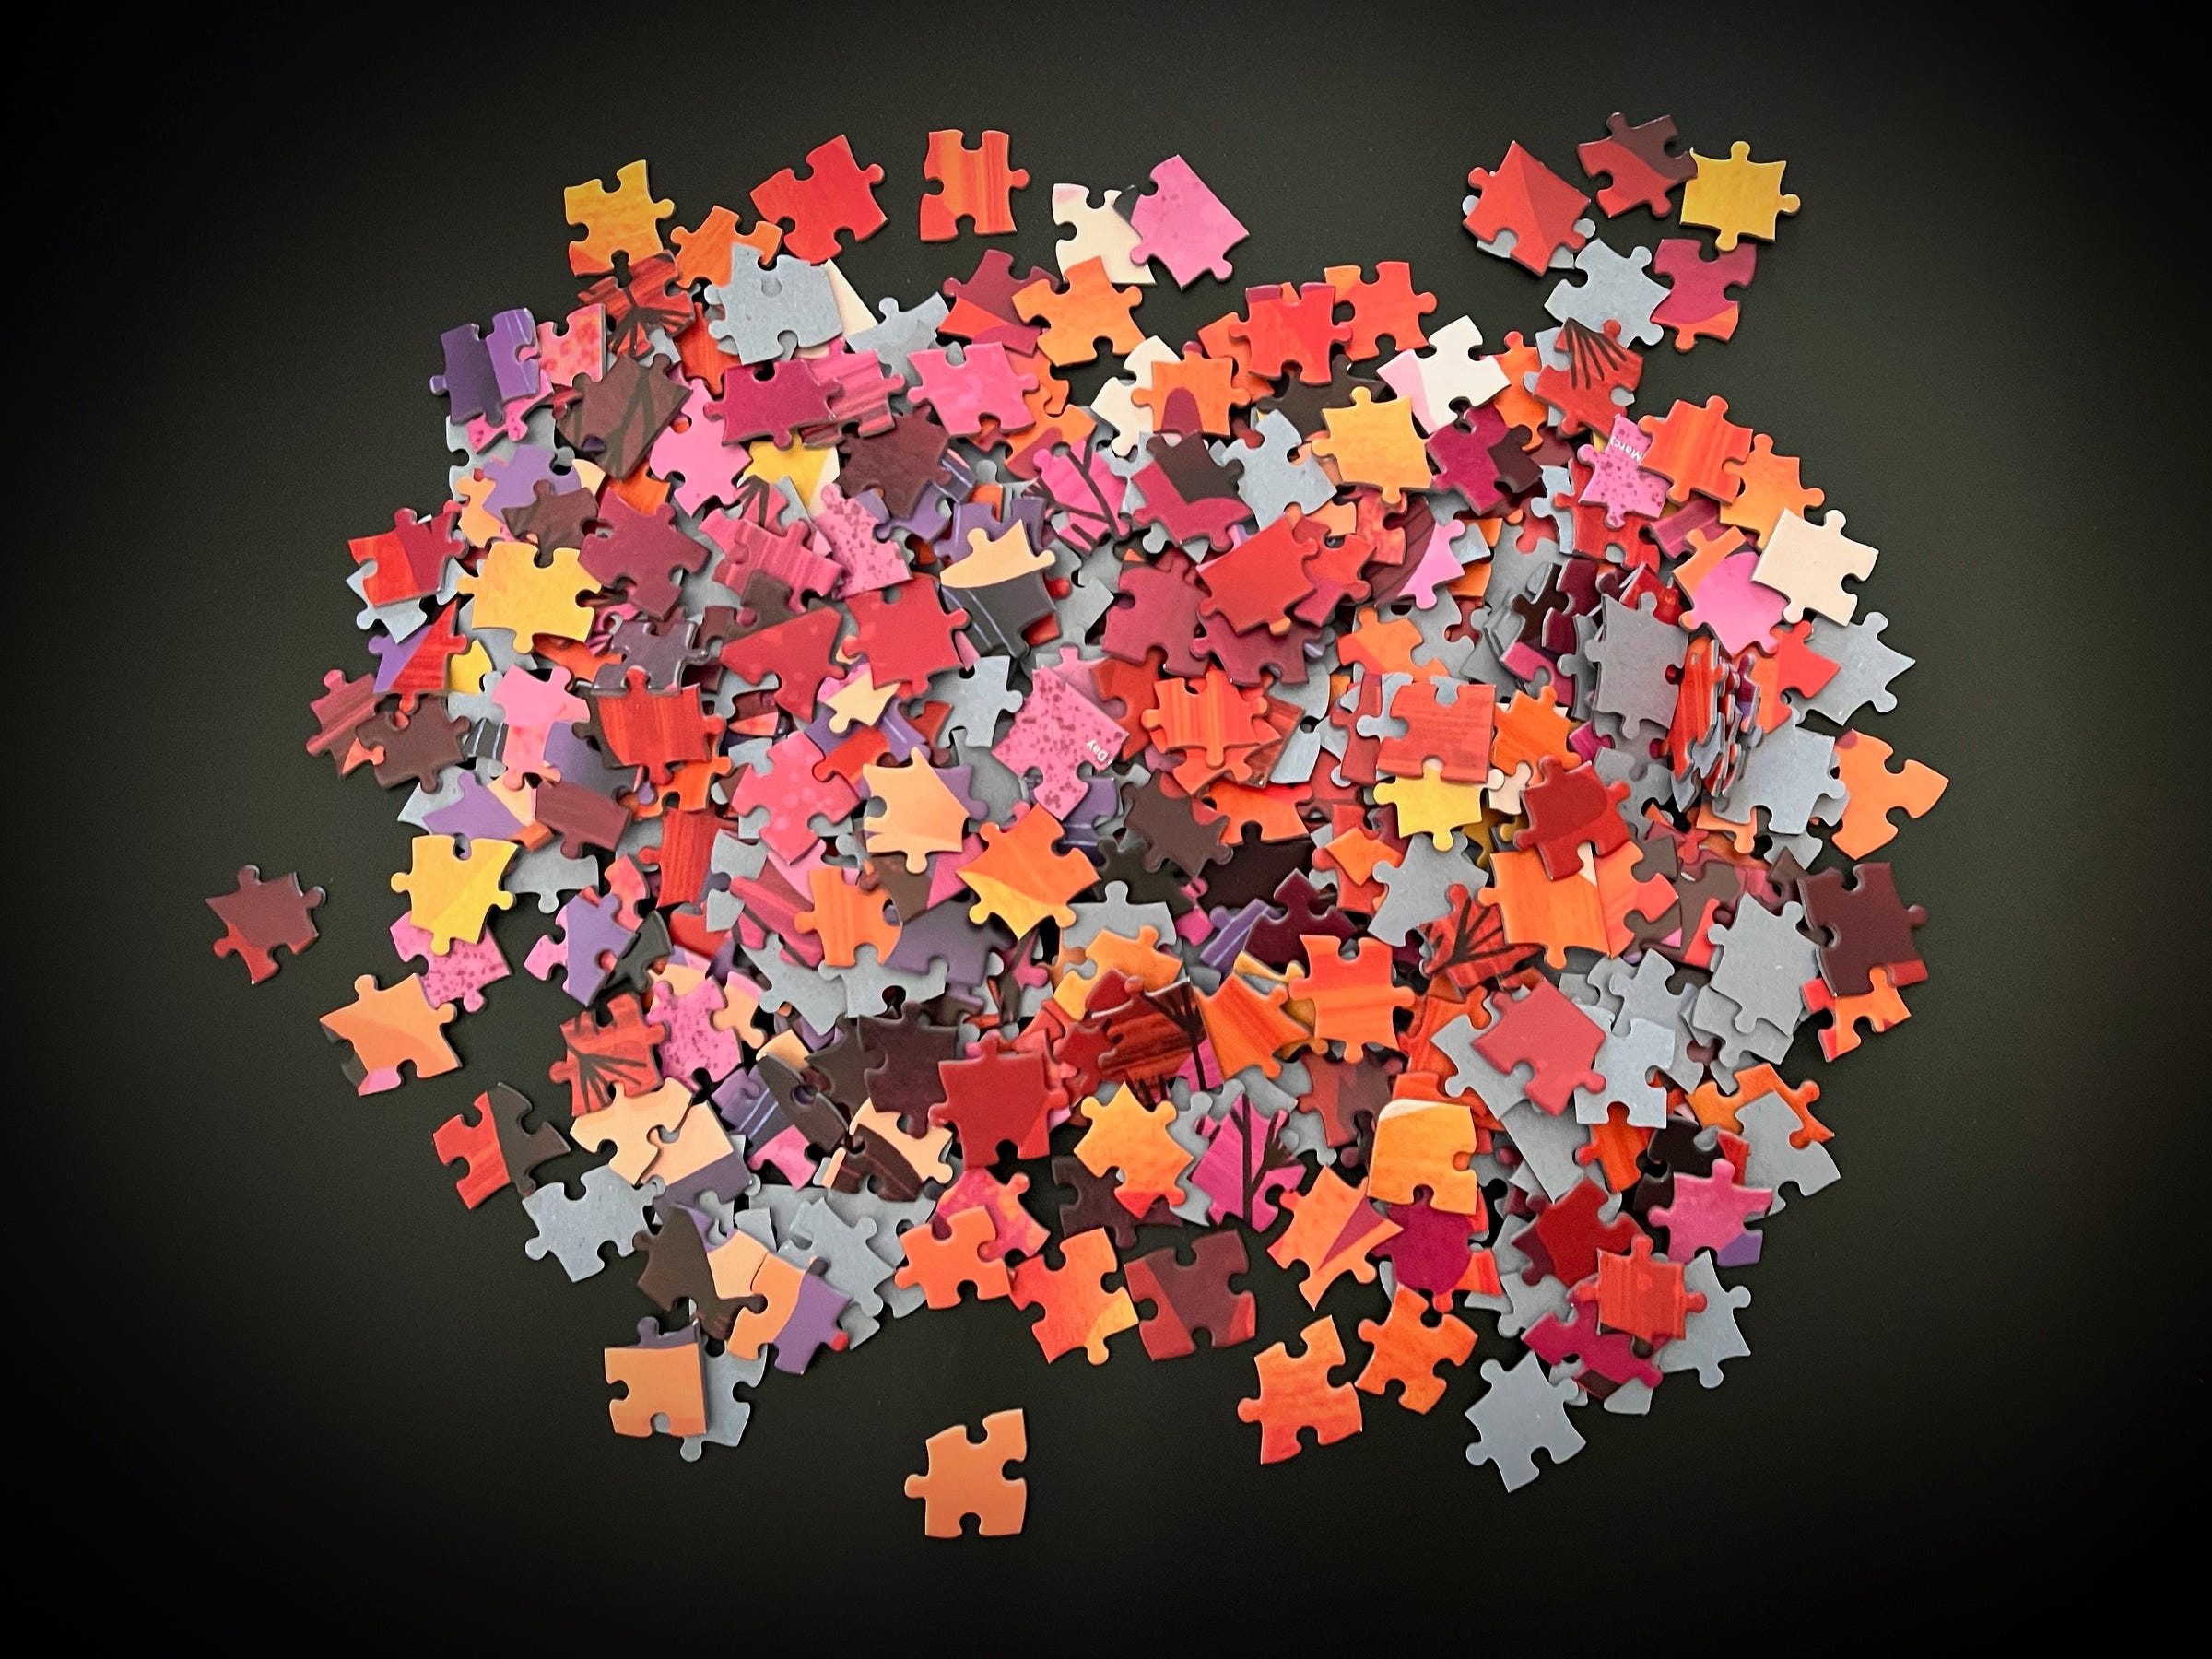 A jumbled pile of jigsaw puzzle pieces against a black background